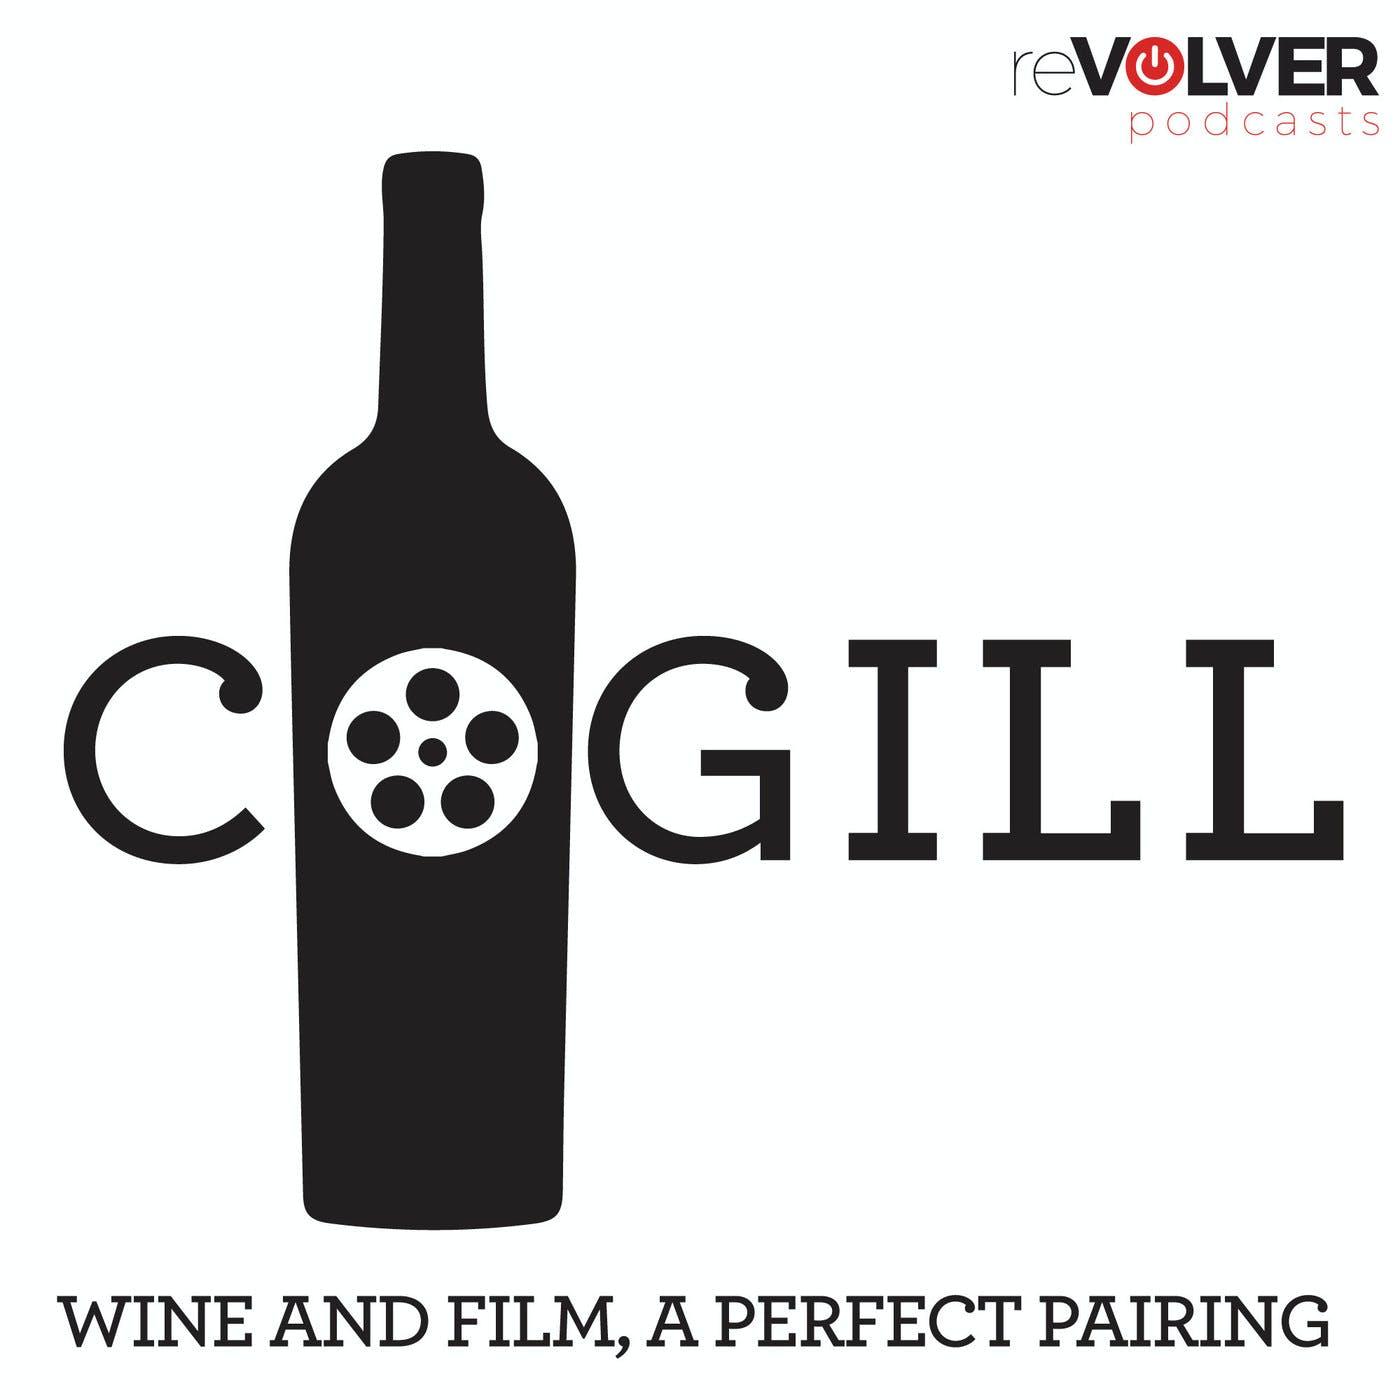 Show poster of Cogill Wine and Film: A Perfect Pairing